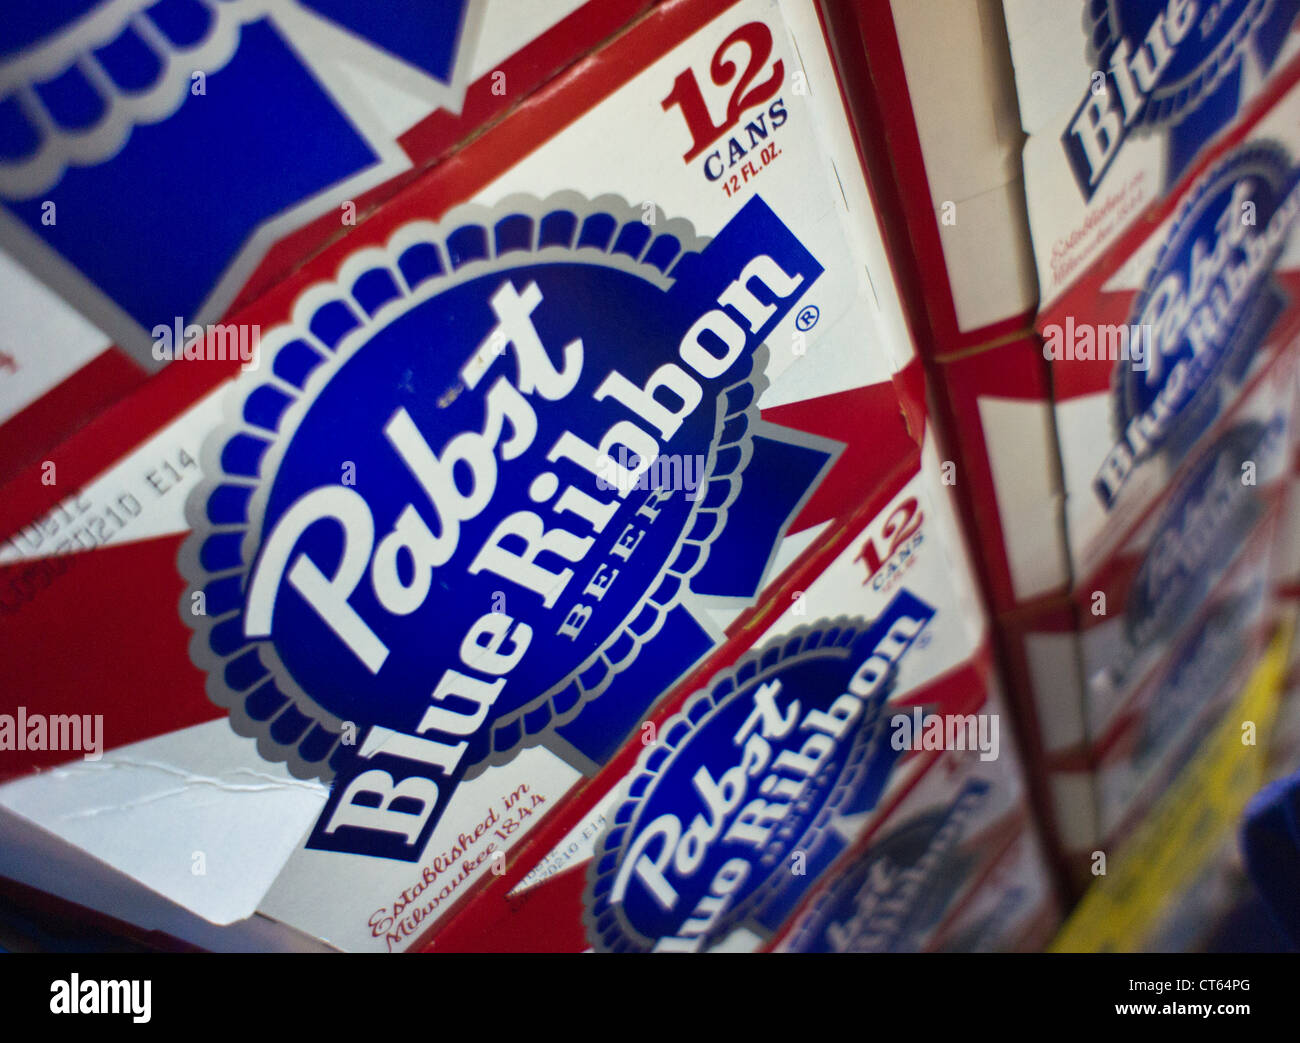 Cases of Pabst Blue Ribbon beer are in seen a supermarket in New York Stock Photo